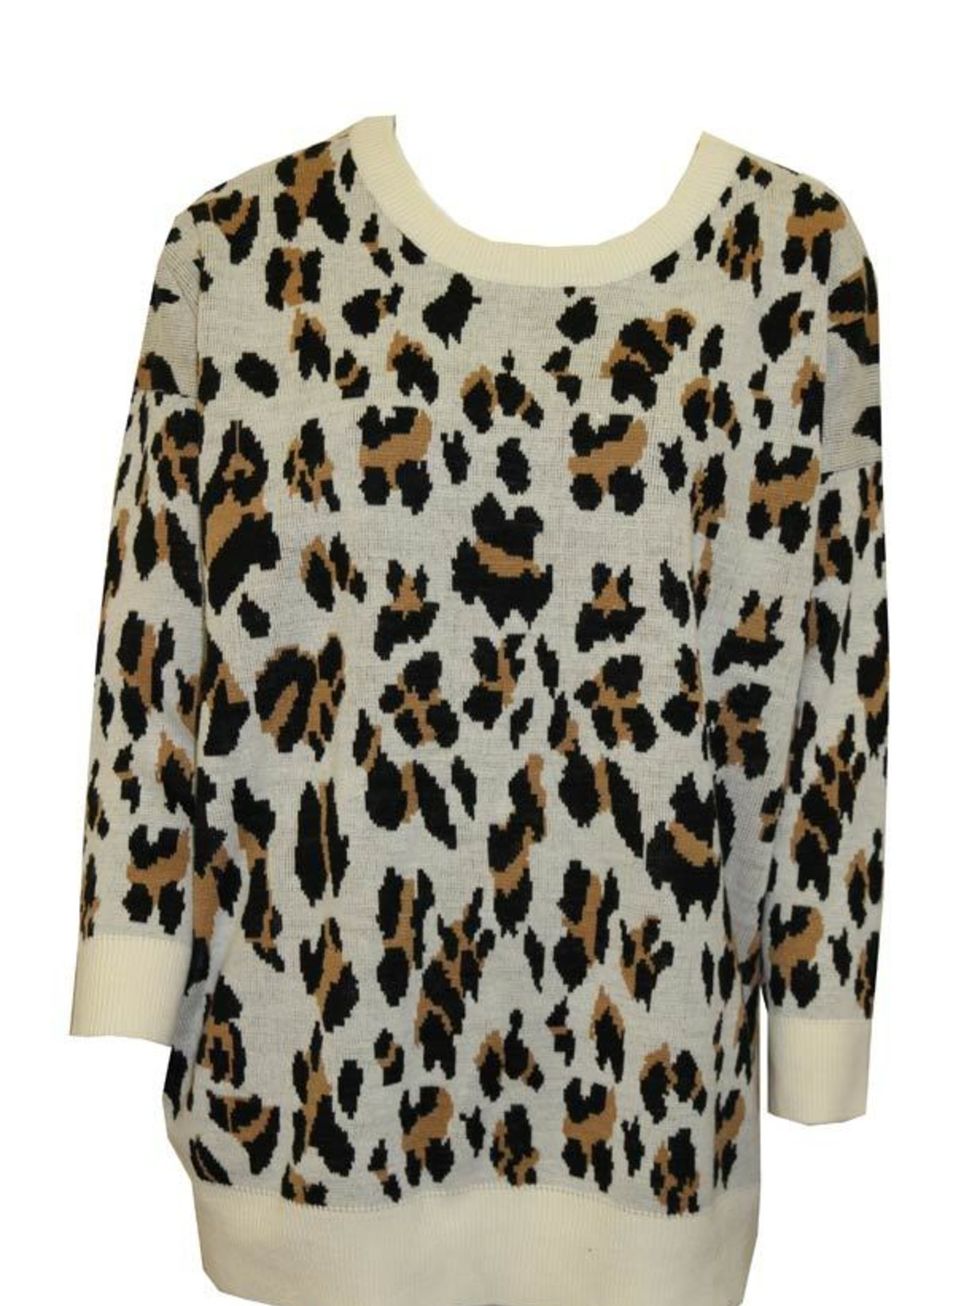 <p>We may be in the midst of an August heatwave but youll be wearing this non-stop come autumn. For now, layer over bikinis and maxis when the temperature drops poolside Mink Pink leopard print jumper, £54, at <a href="http://www.urbanoutfitters.co.uk/"